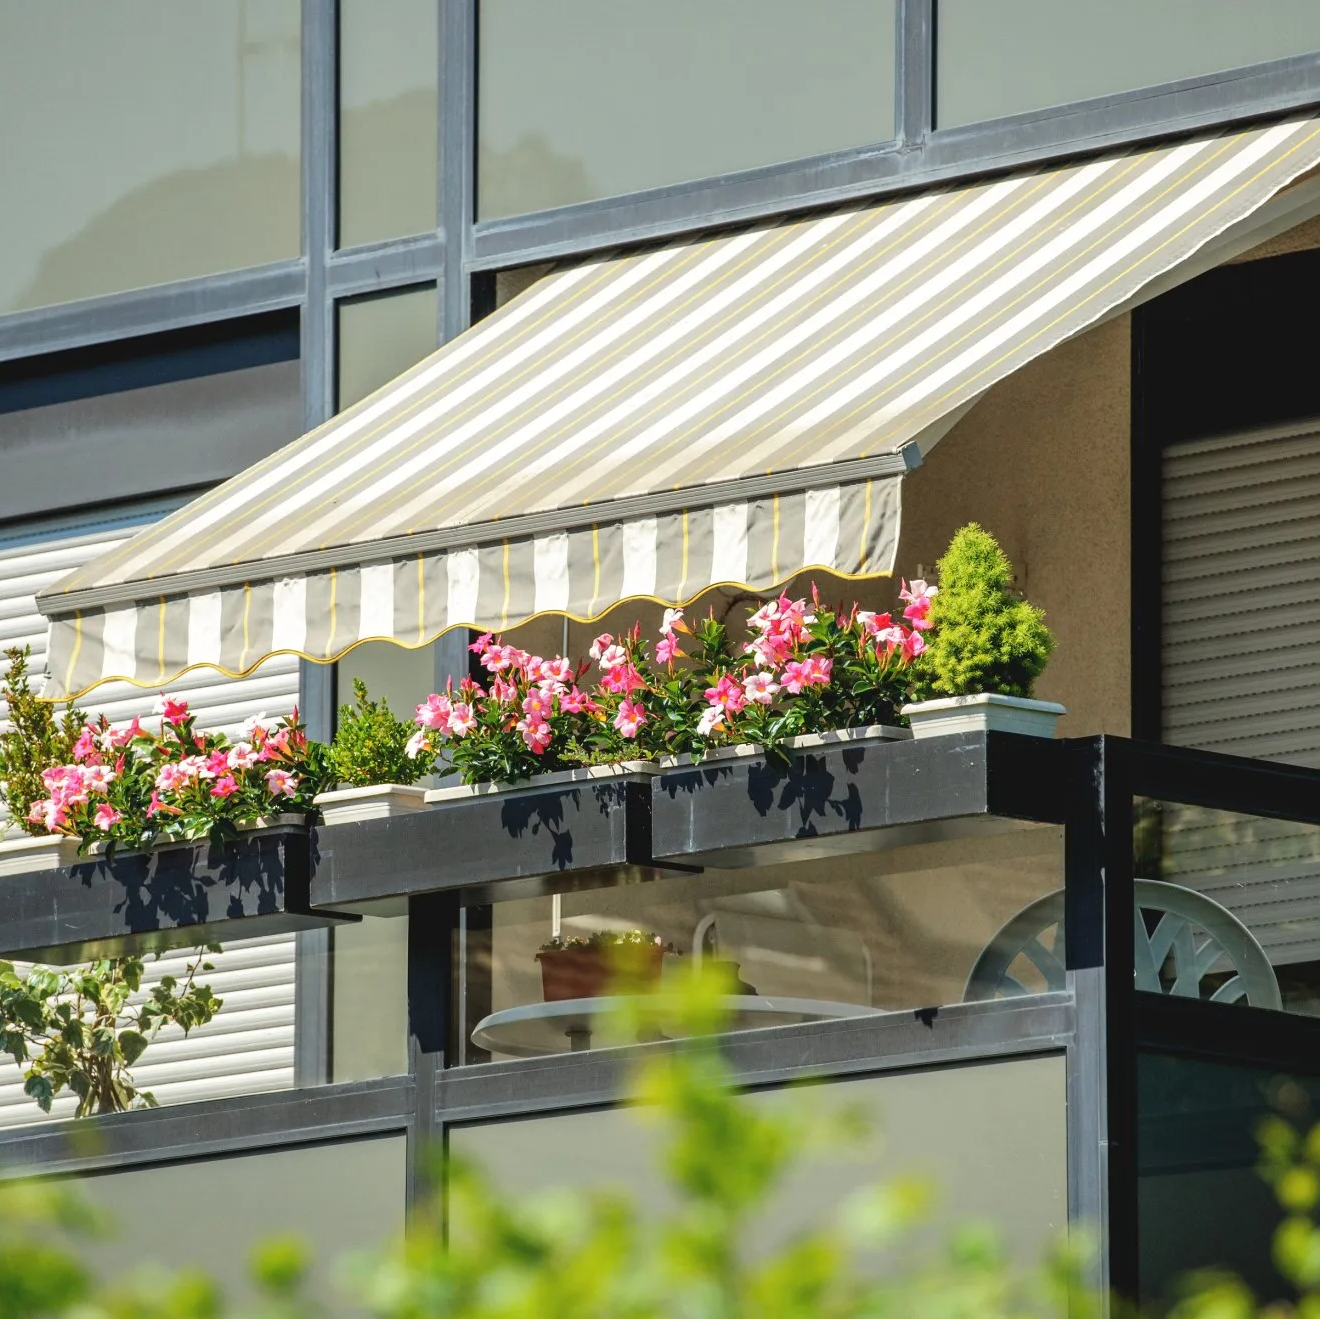 Outdoor striped awning covering first floor balcony with potted plants on railing.